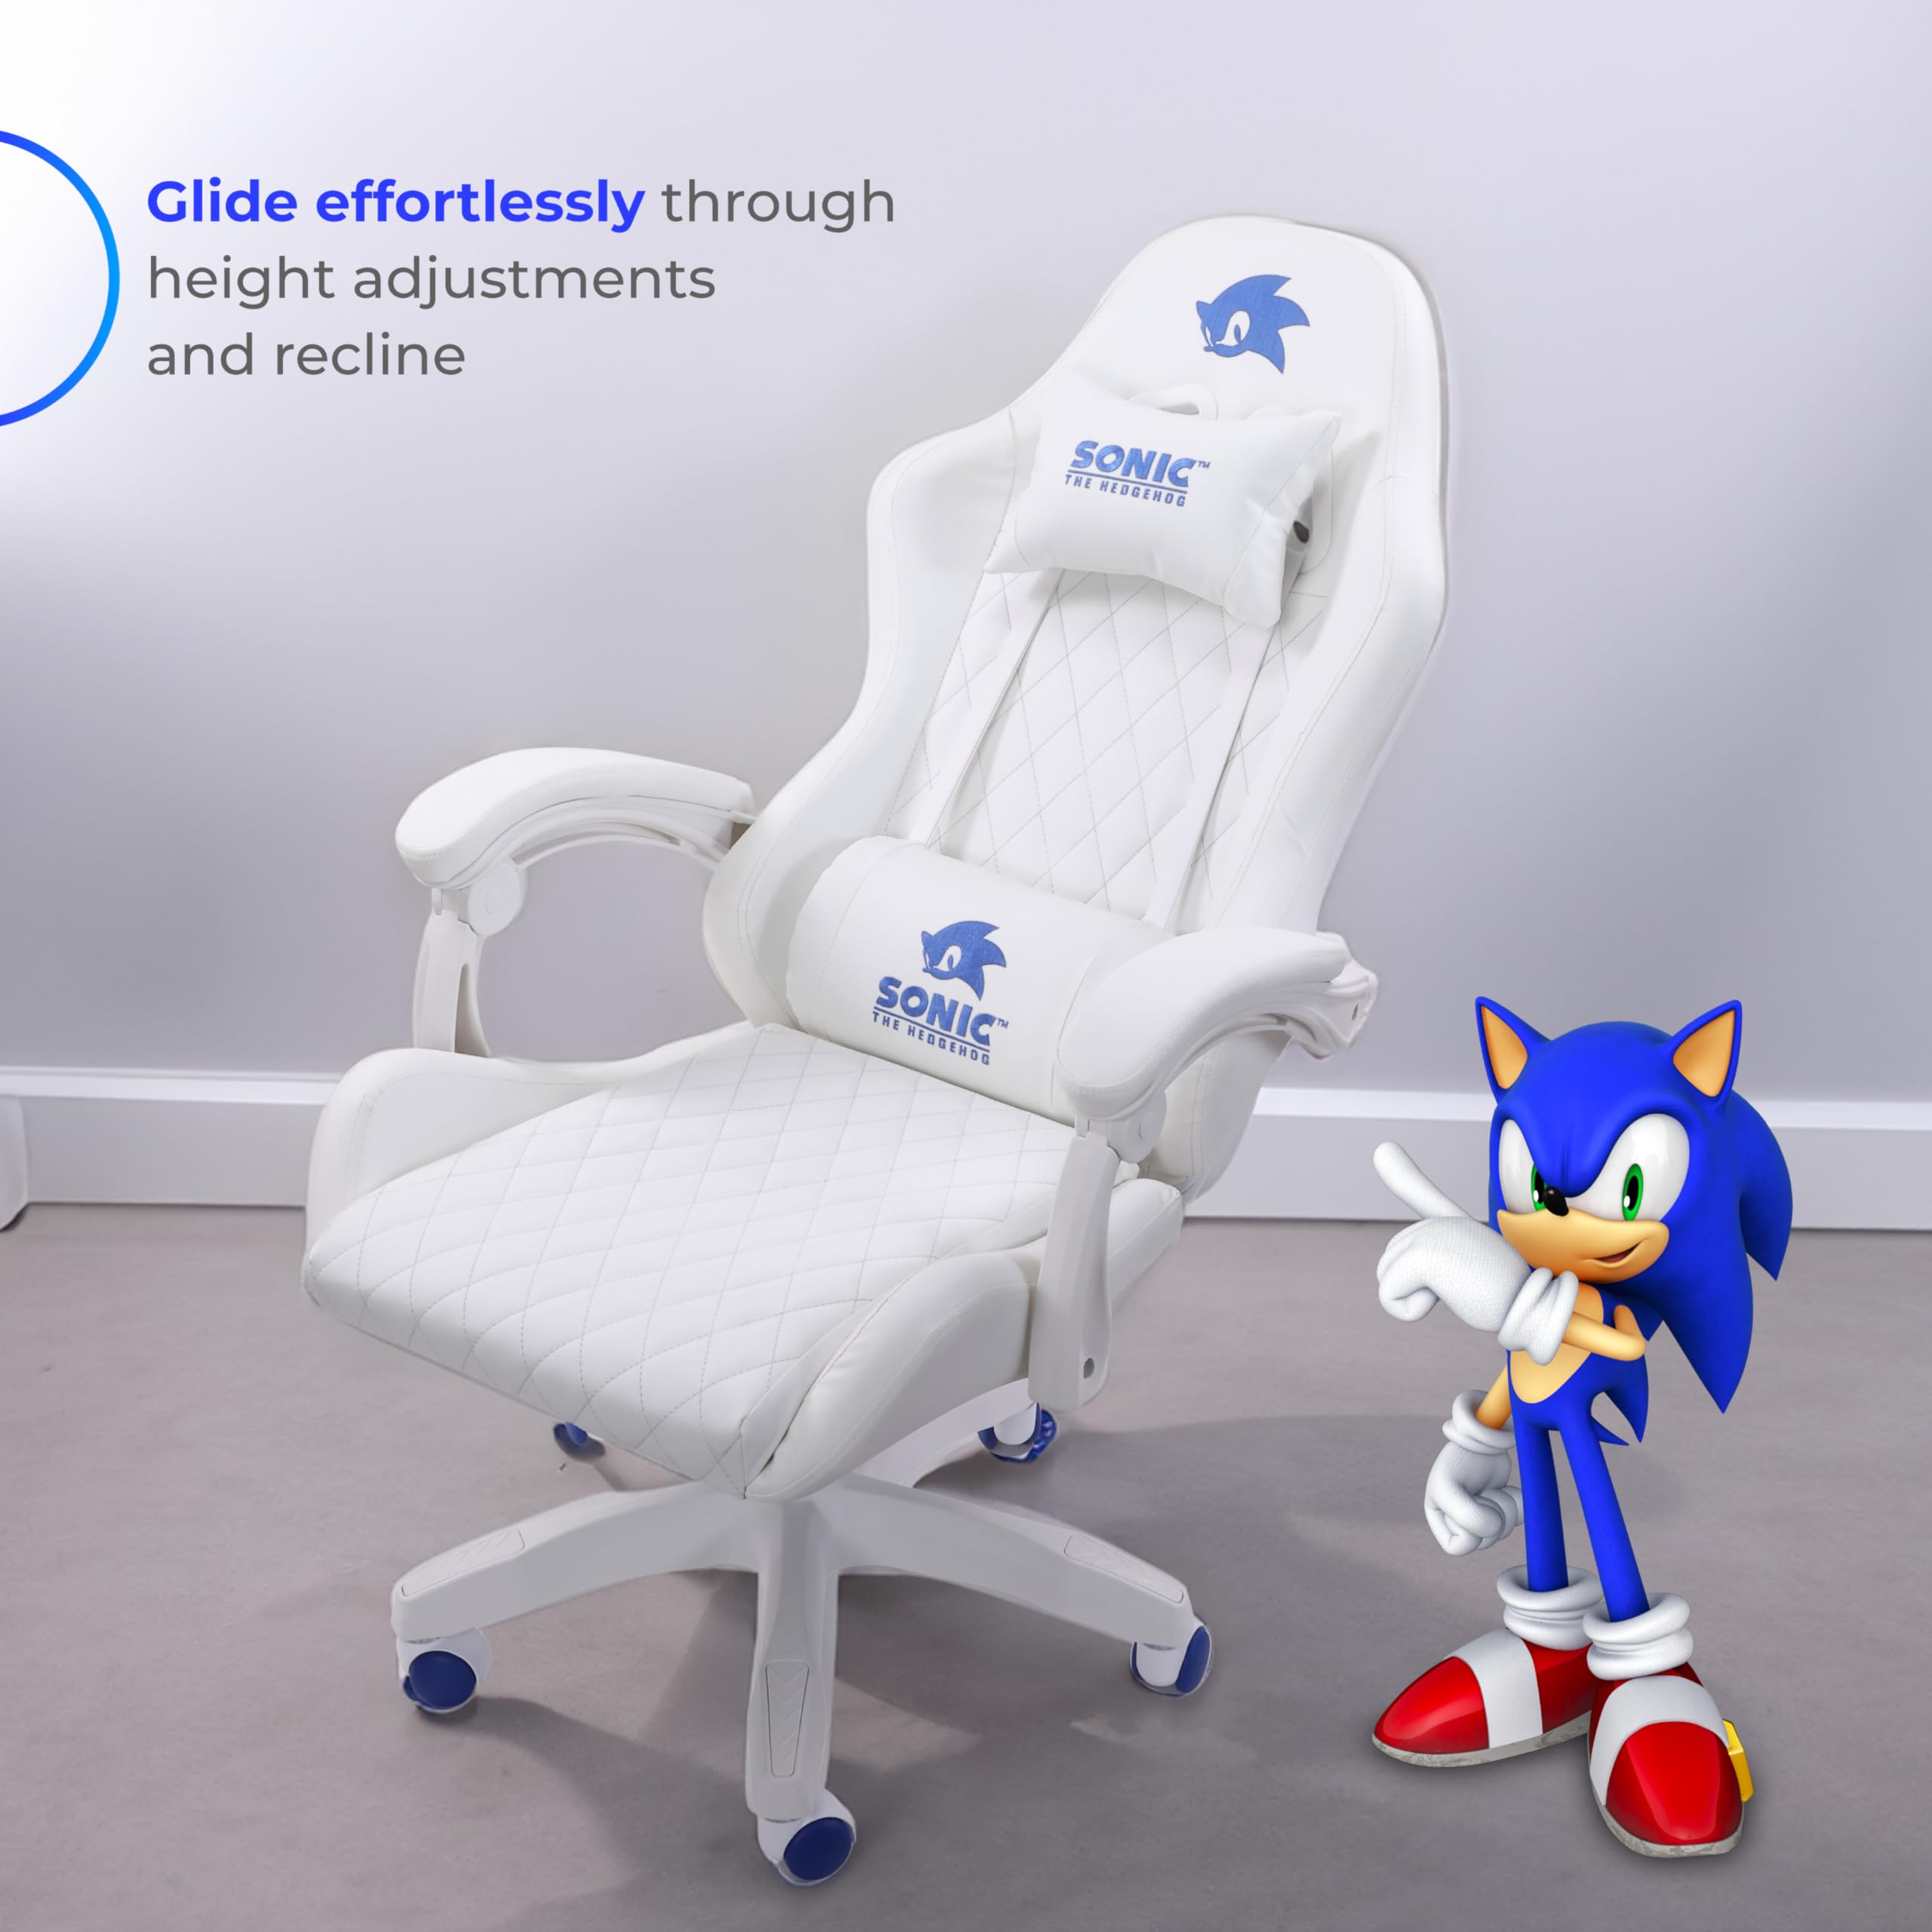 Sonic the Hedgehog Gaming Chair - Premium PU Leather, Reclining Armrest, Class 4 Gaslift, Adjustable 90-135 Degrees, Stylish Design for Adults and Teens, 120lbs Capacity, Blue-White Caster